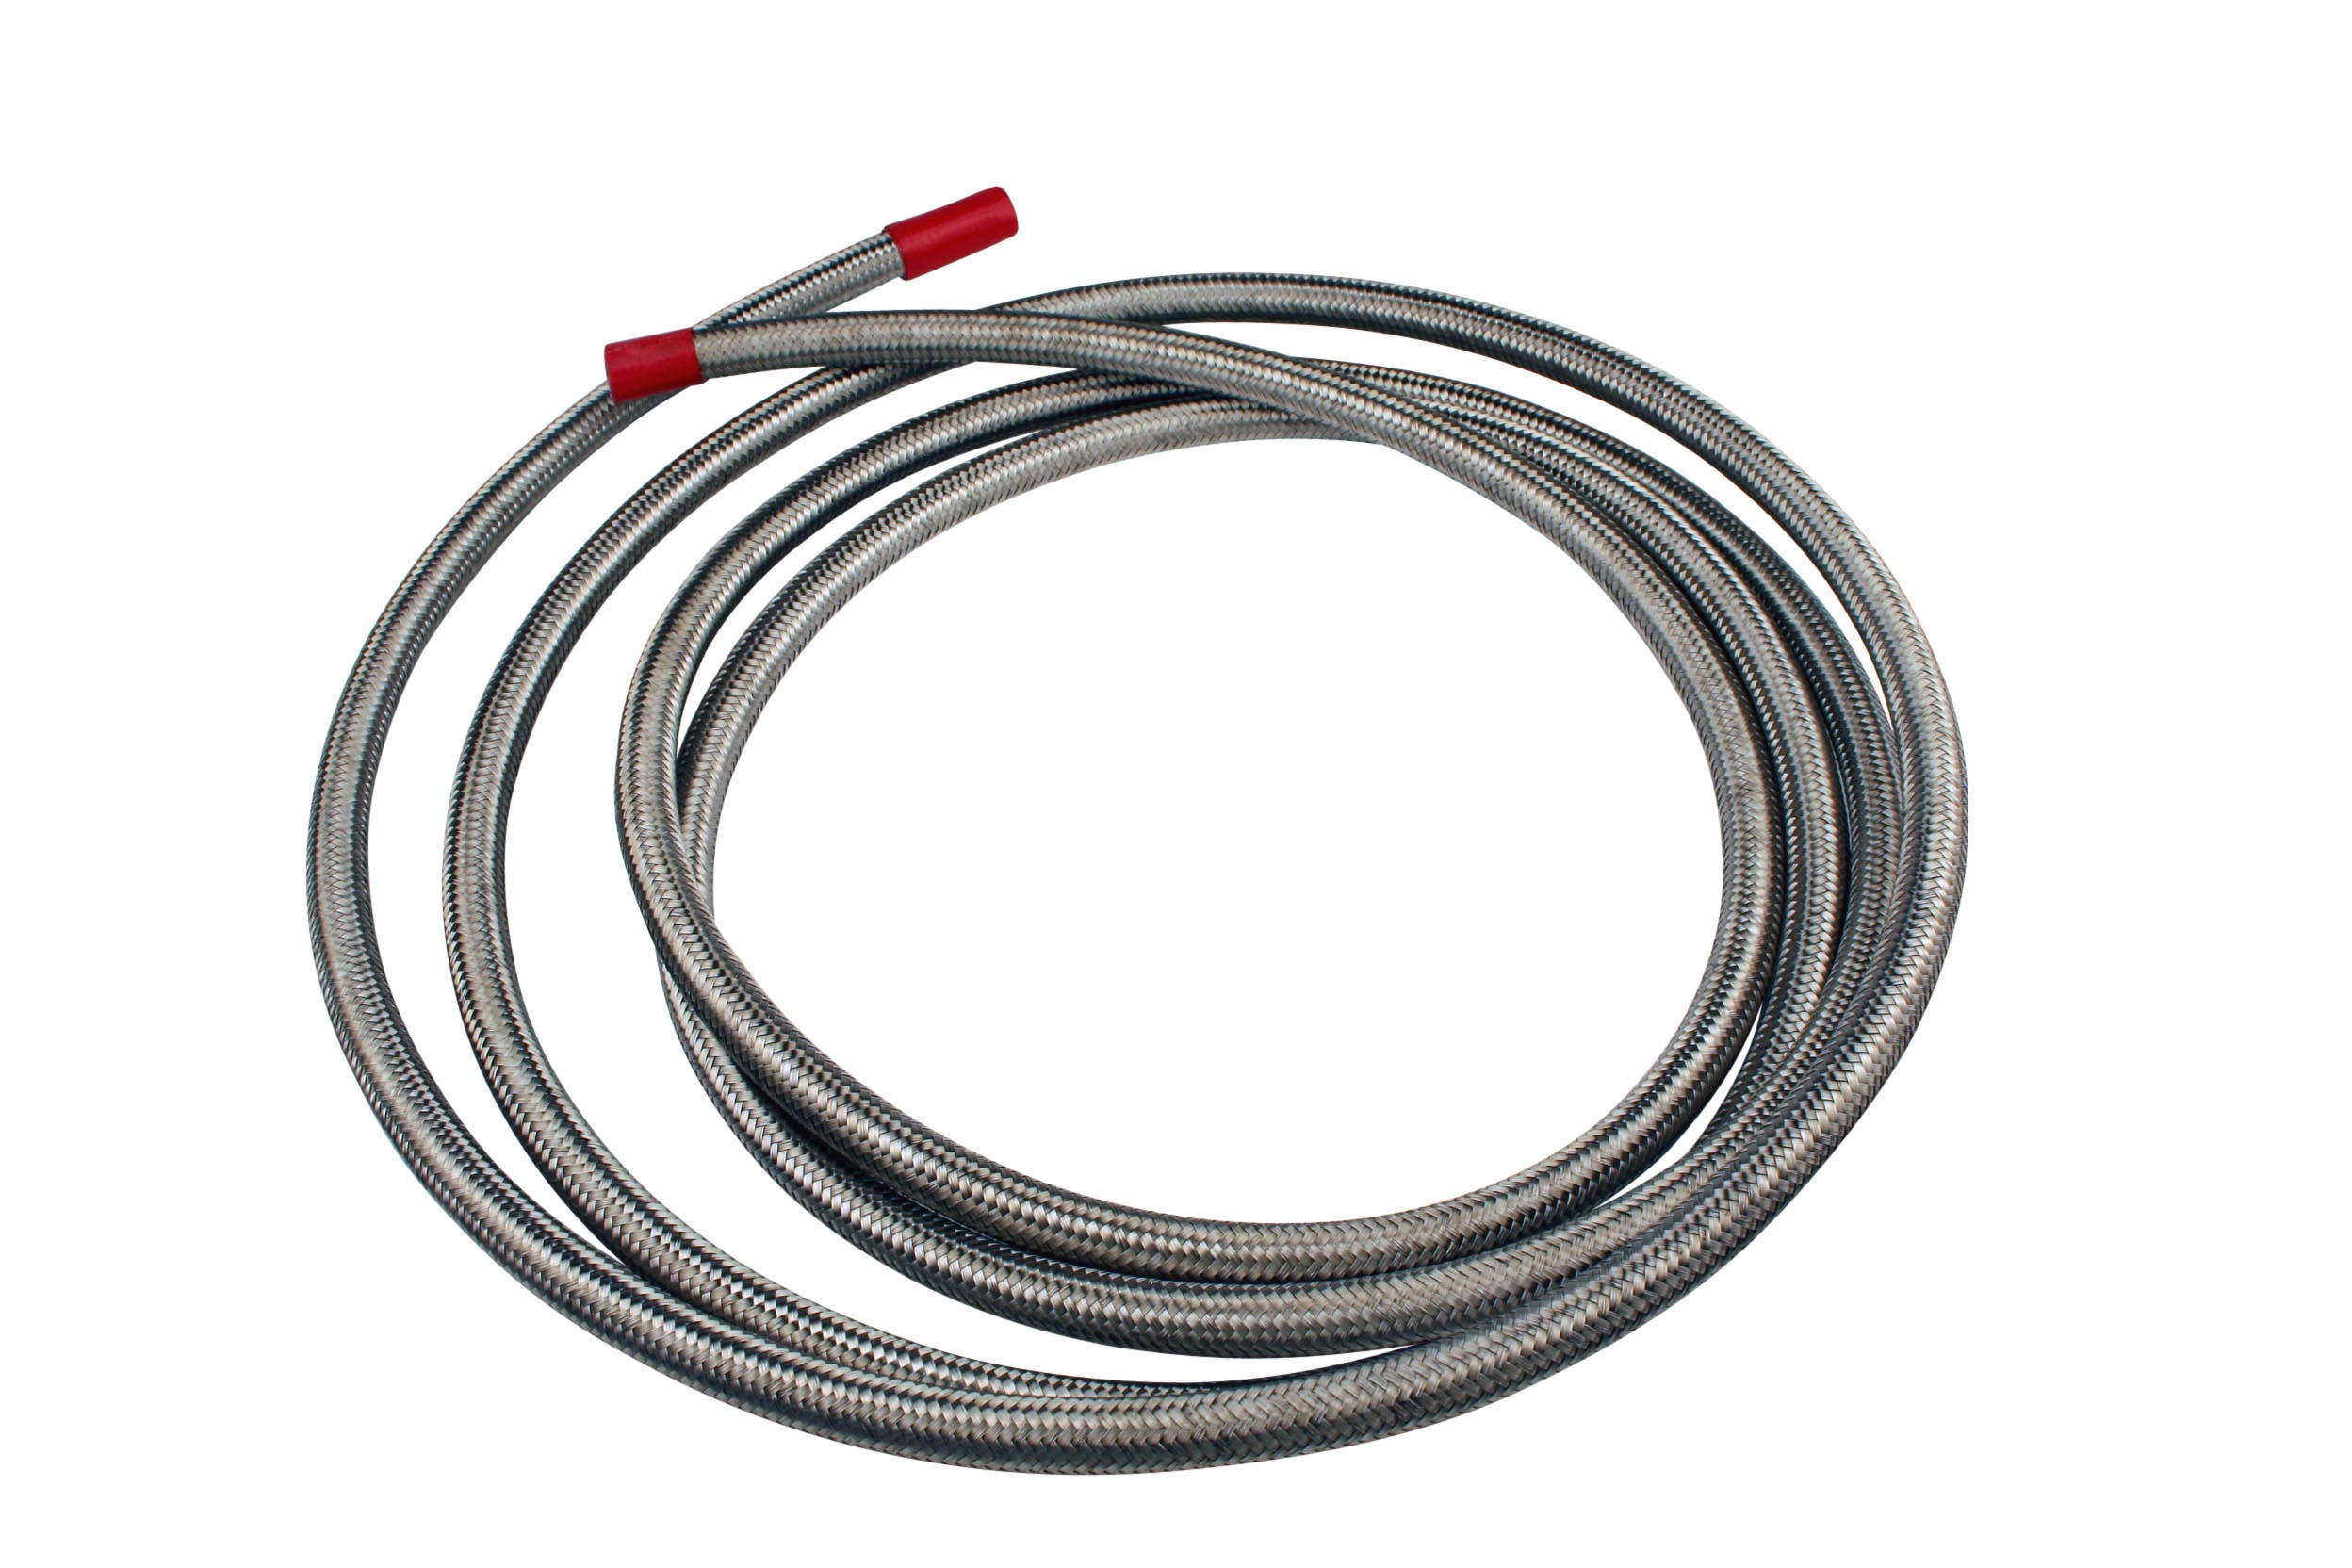 Aeromotive Fuel System 15703 Hose, Fuel, Stainless Steel Braided, AN-06 x 12